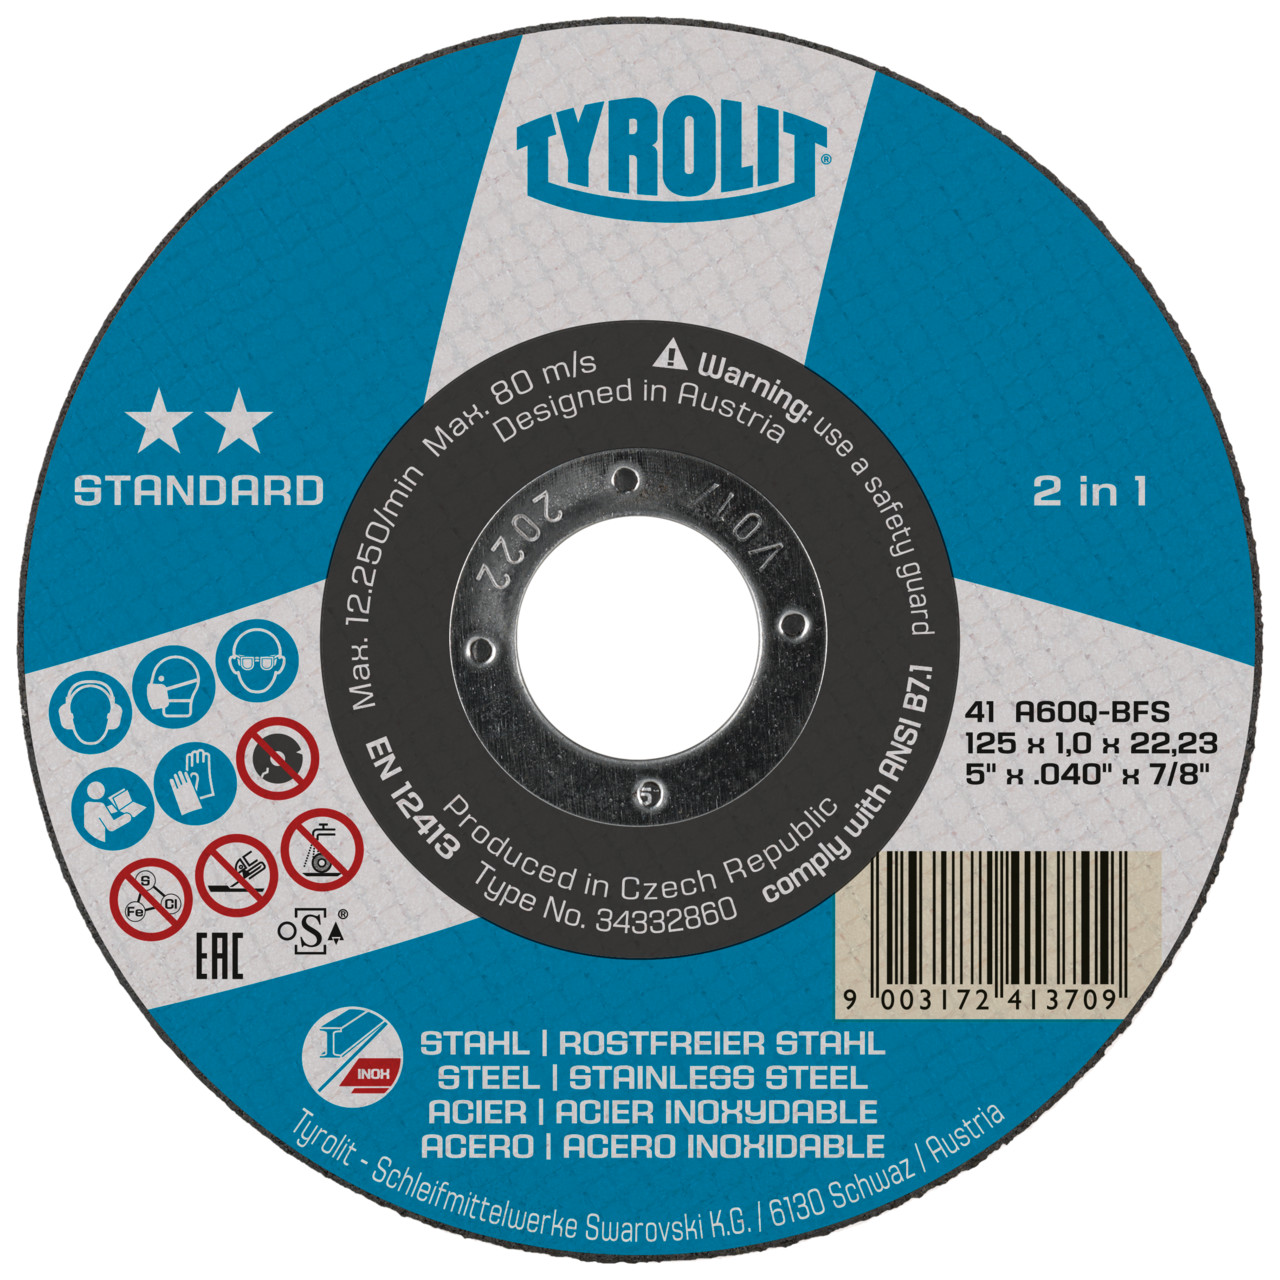 TYROLIT cut-off wheels DxDxH 115x1.6x22.23 2in1 for steel and stainless steel, shape: 41 - straight version, Art. 34332861